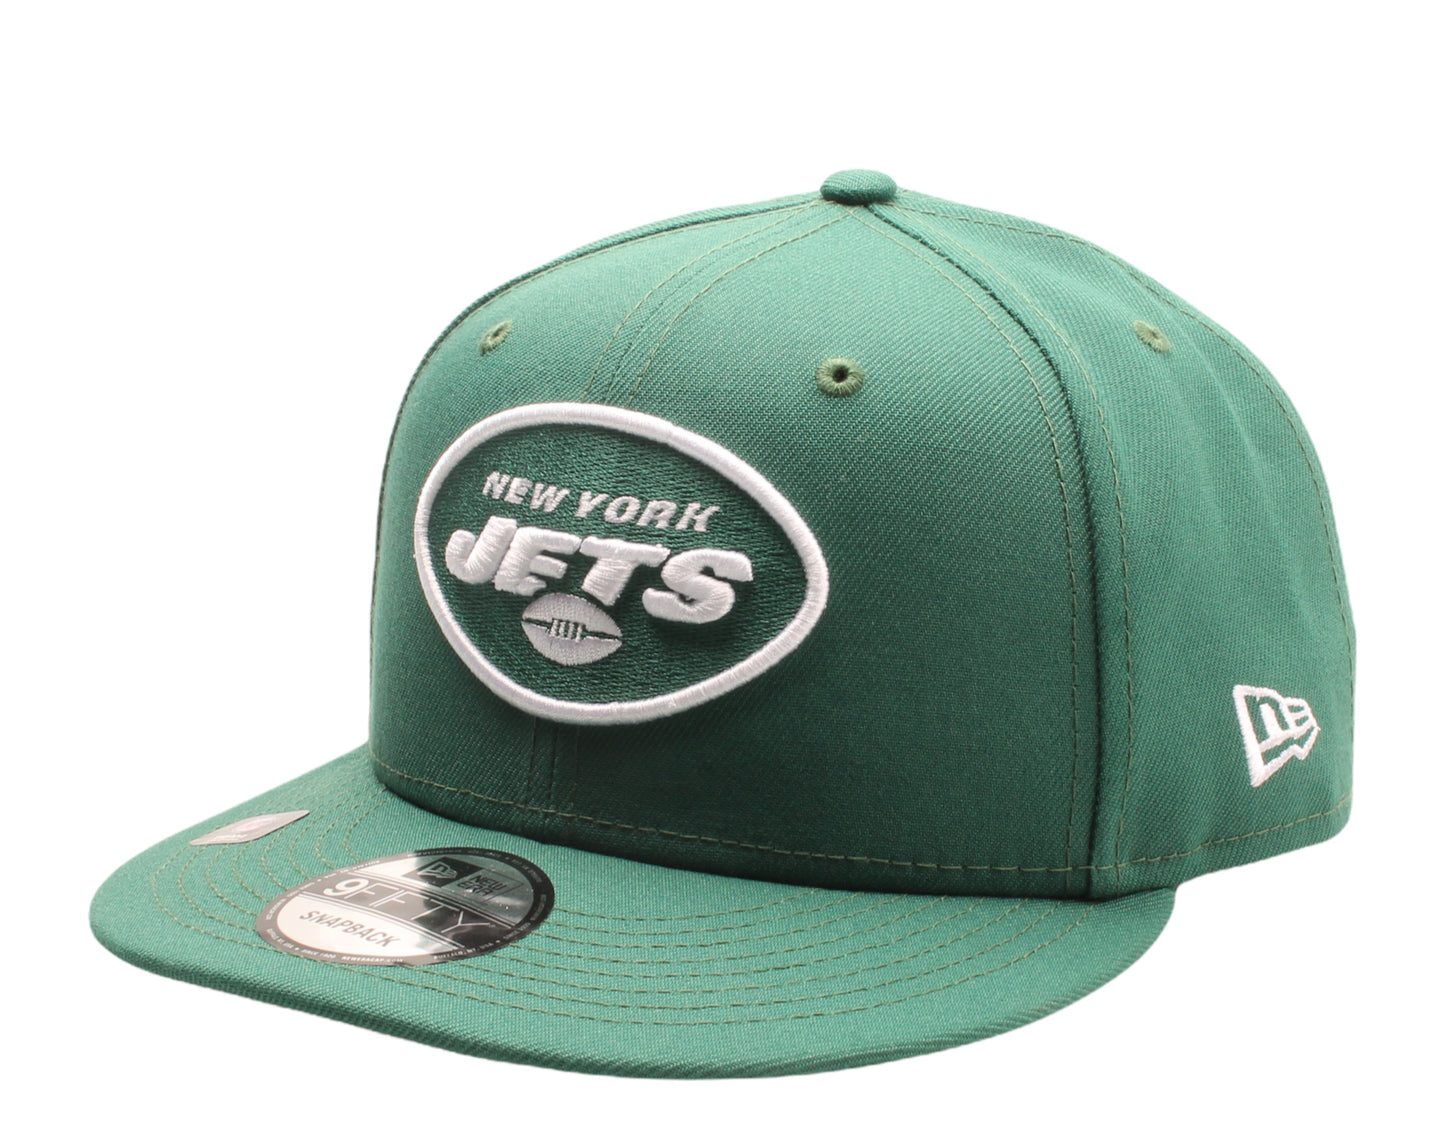 New Era 9Fifty NFL New York Jets III Super Bowl Patch Up Snapback Hat